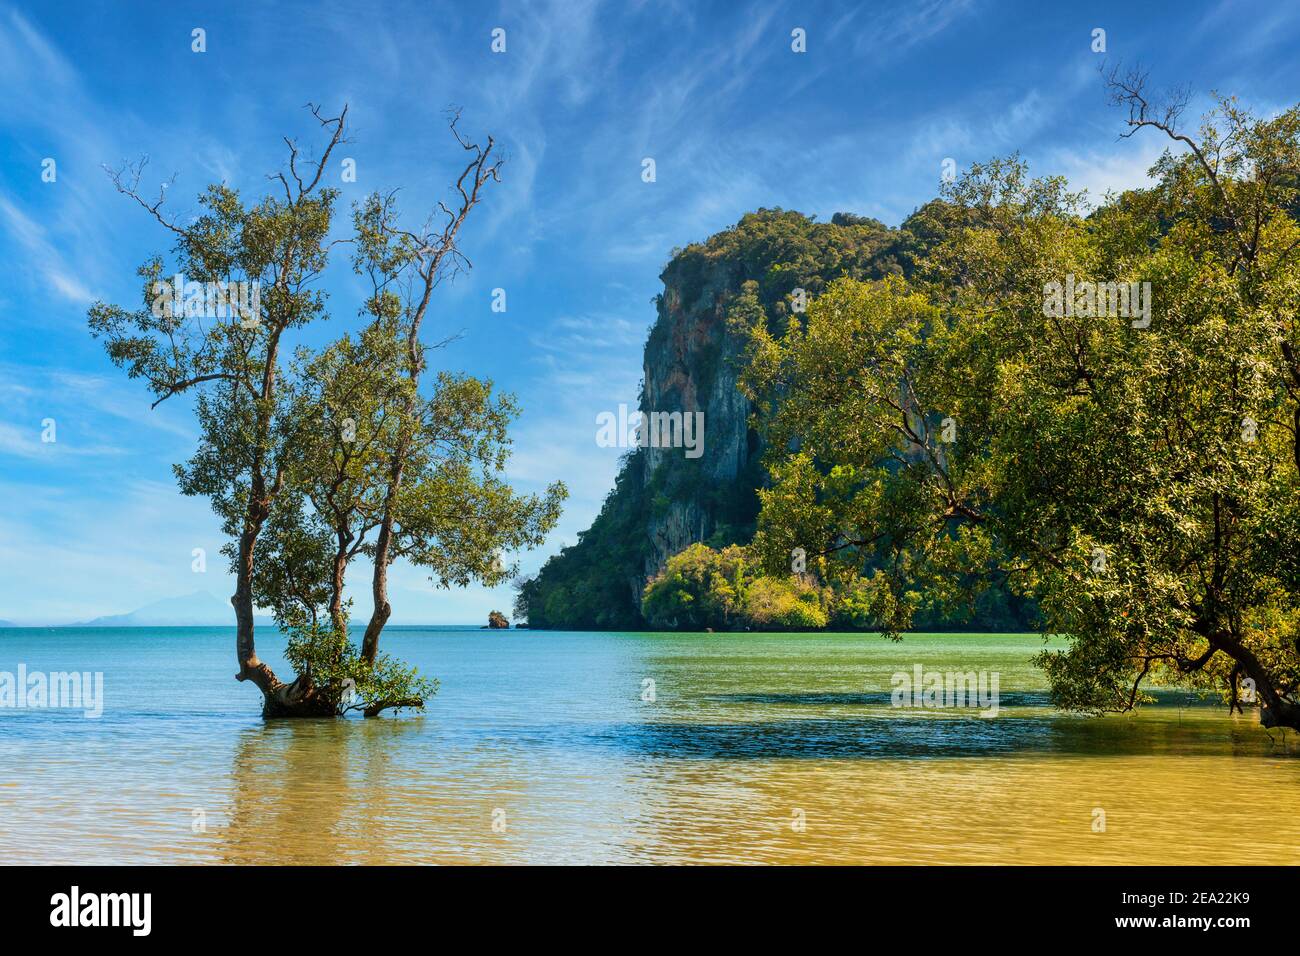 Mangrove Trees growing in the placid waters off Krabi in Thailand Stock Photo